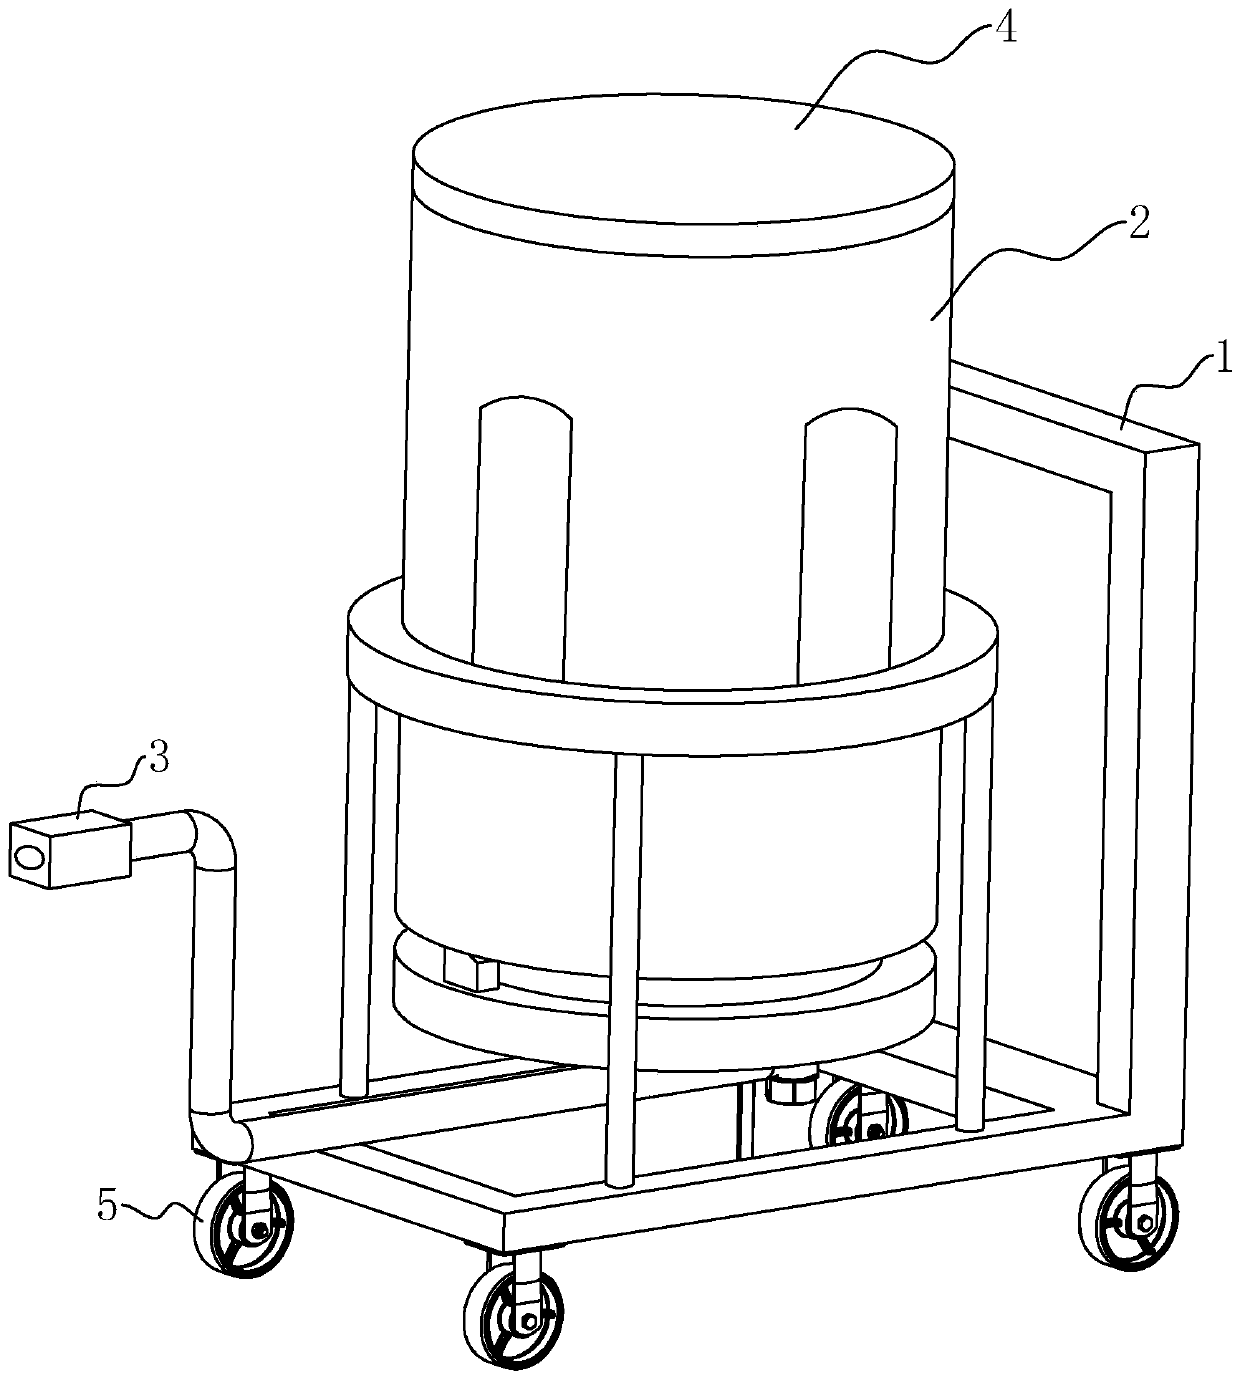 A construction spraying device